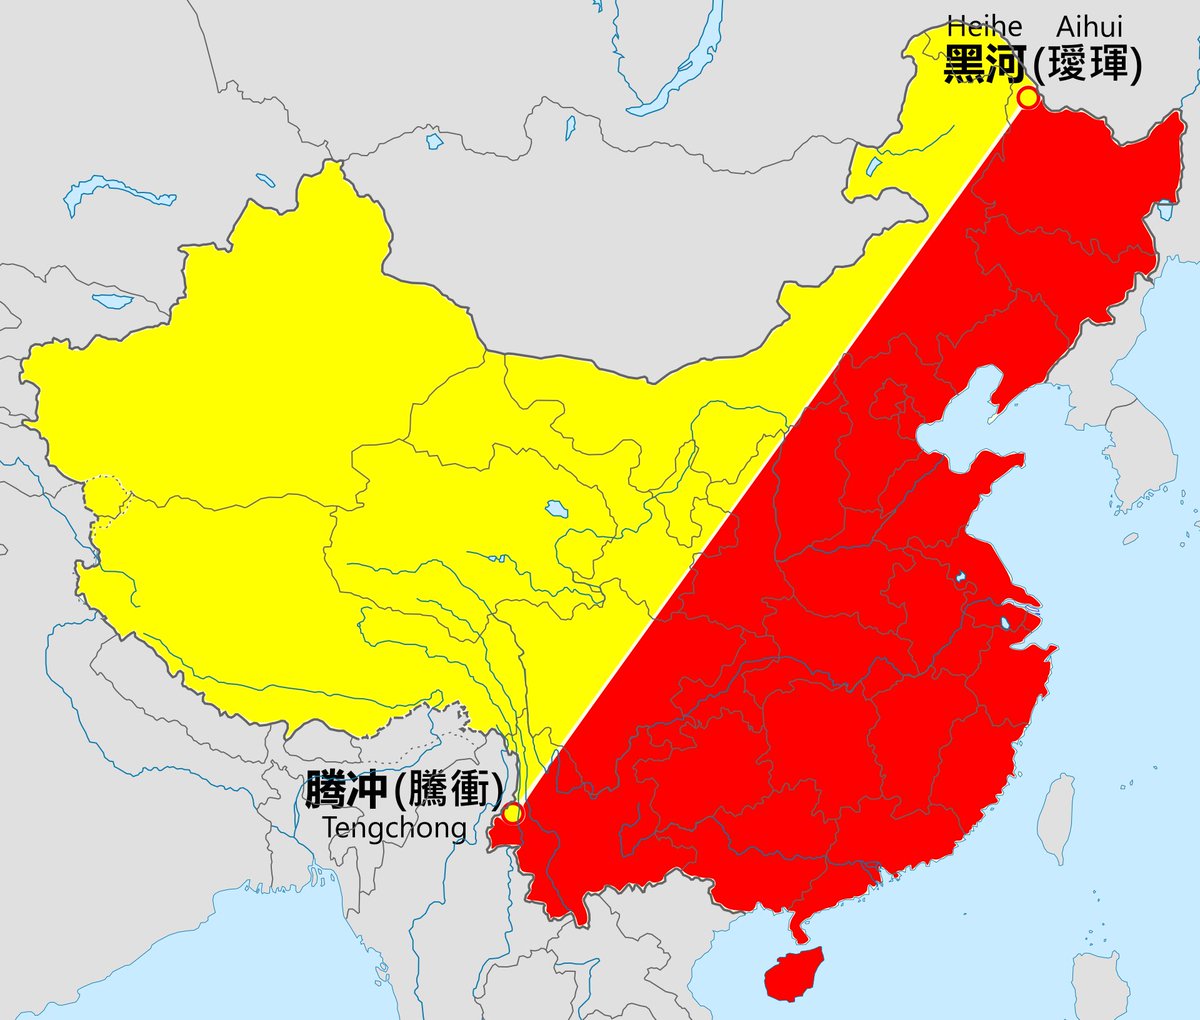 China’s infrastructure miracle worked because of the sheer scale of all things China. Giant highways, ports and railways could reliably connect tens/hundreds of millions of citizens/producers/consumers about anywhere east of the Heihe-Tengchong line (90+% of the population) 4